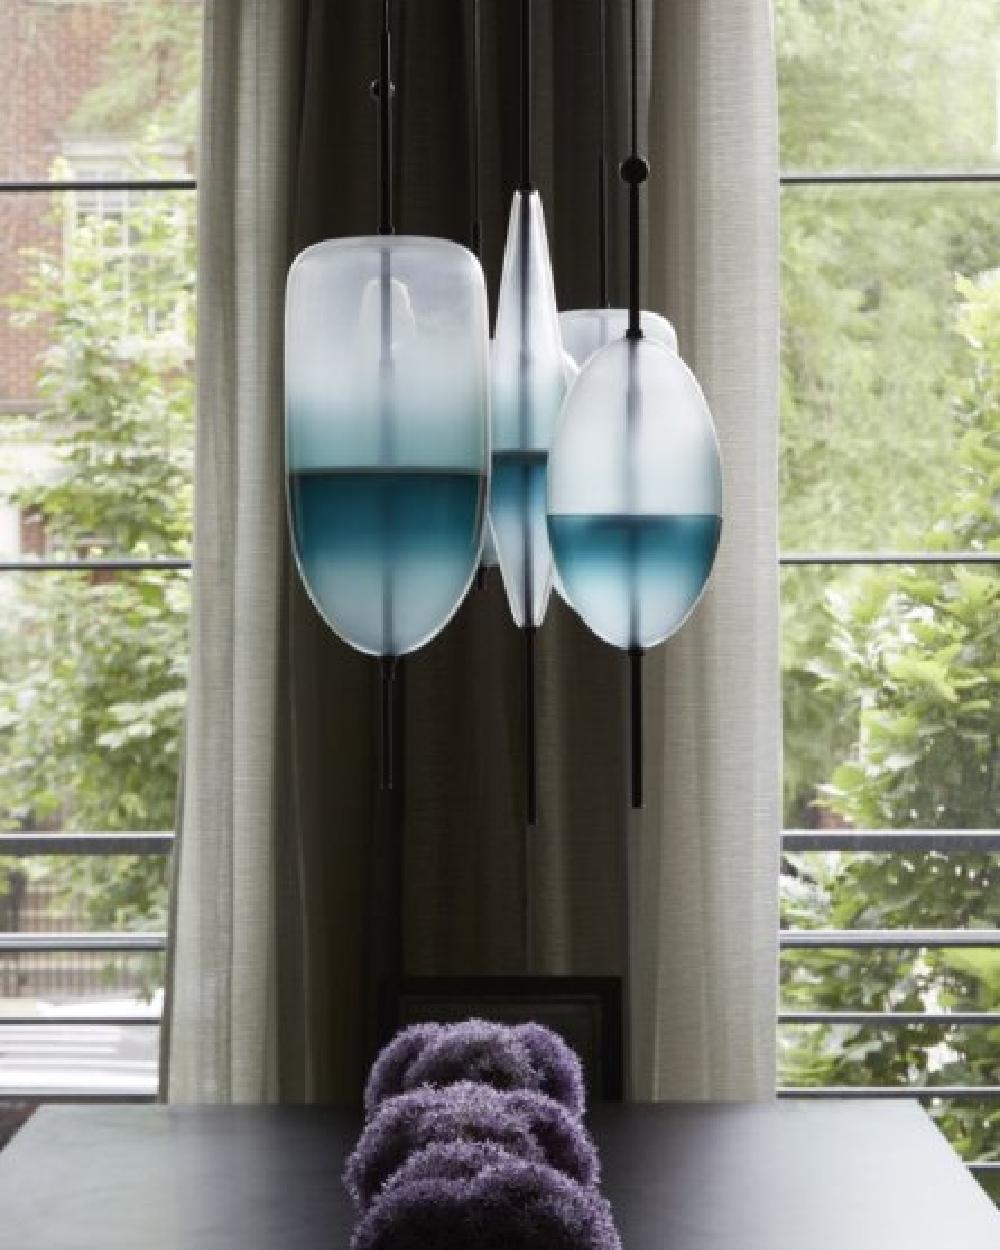 FLOW[T] S6 Pendant lamp in Turquoise by Nao Tamura for Wonderglass For Sale 3